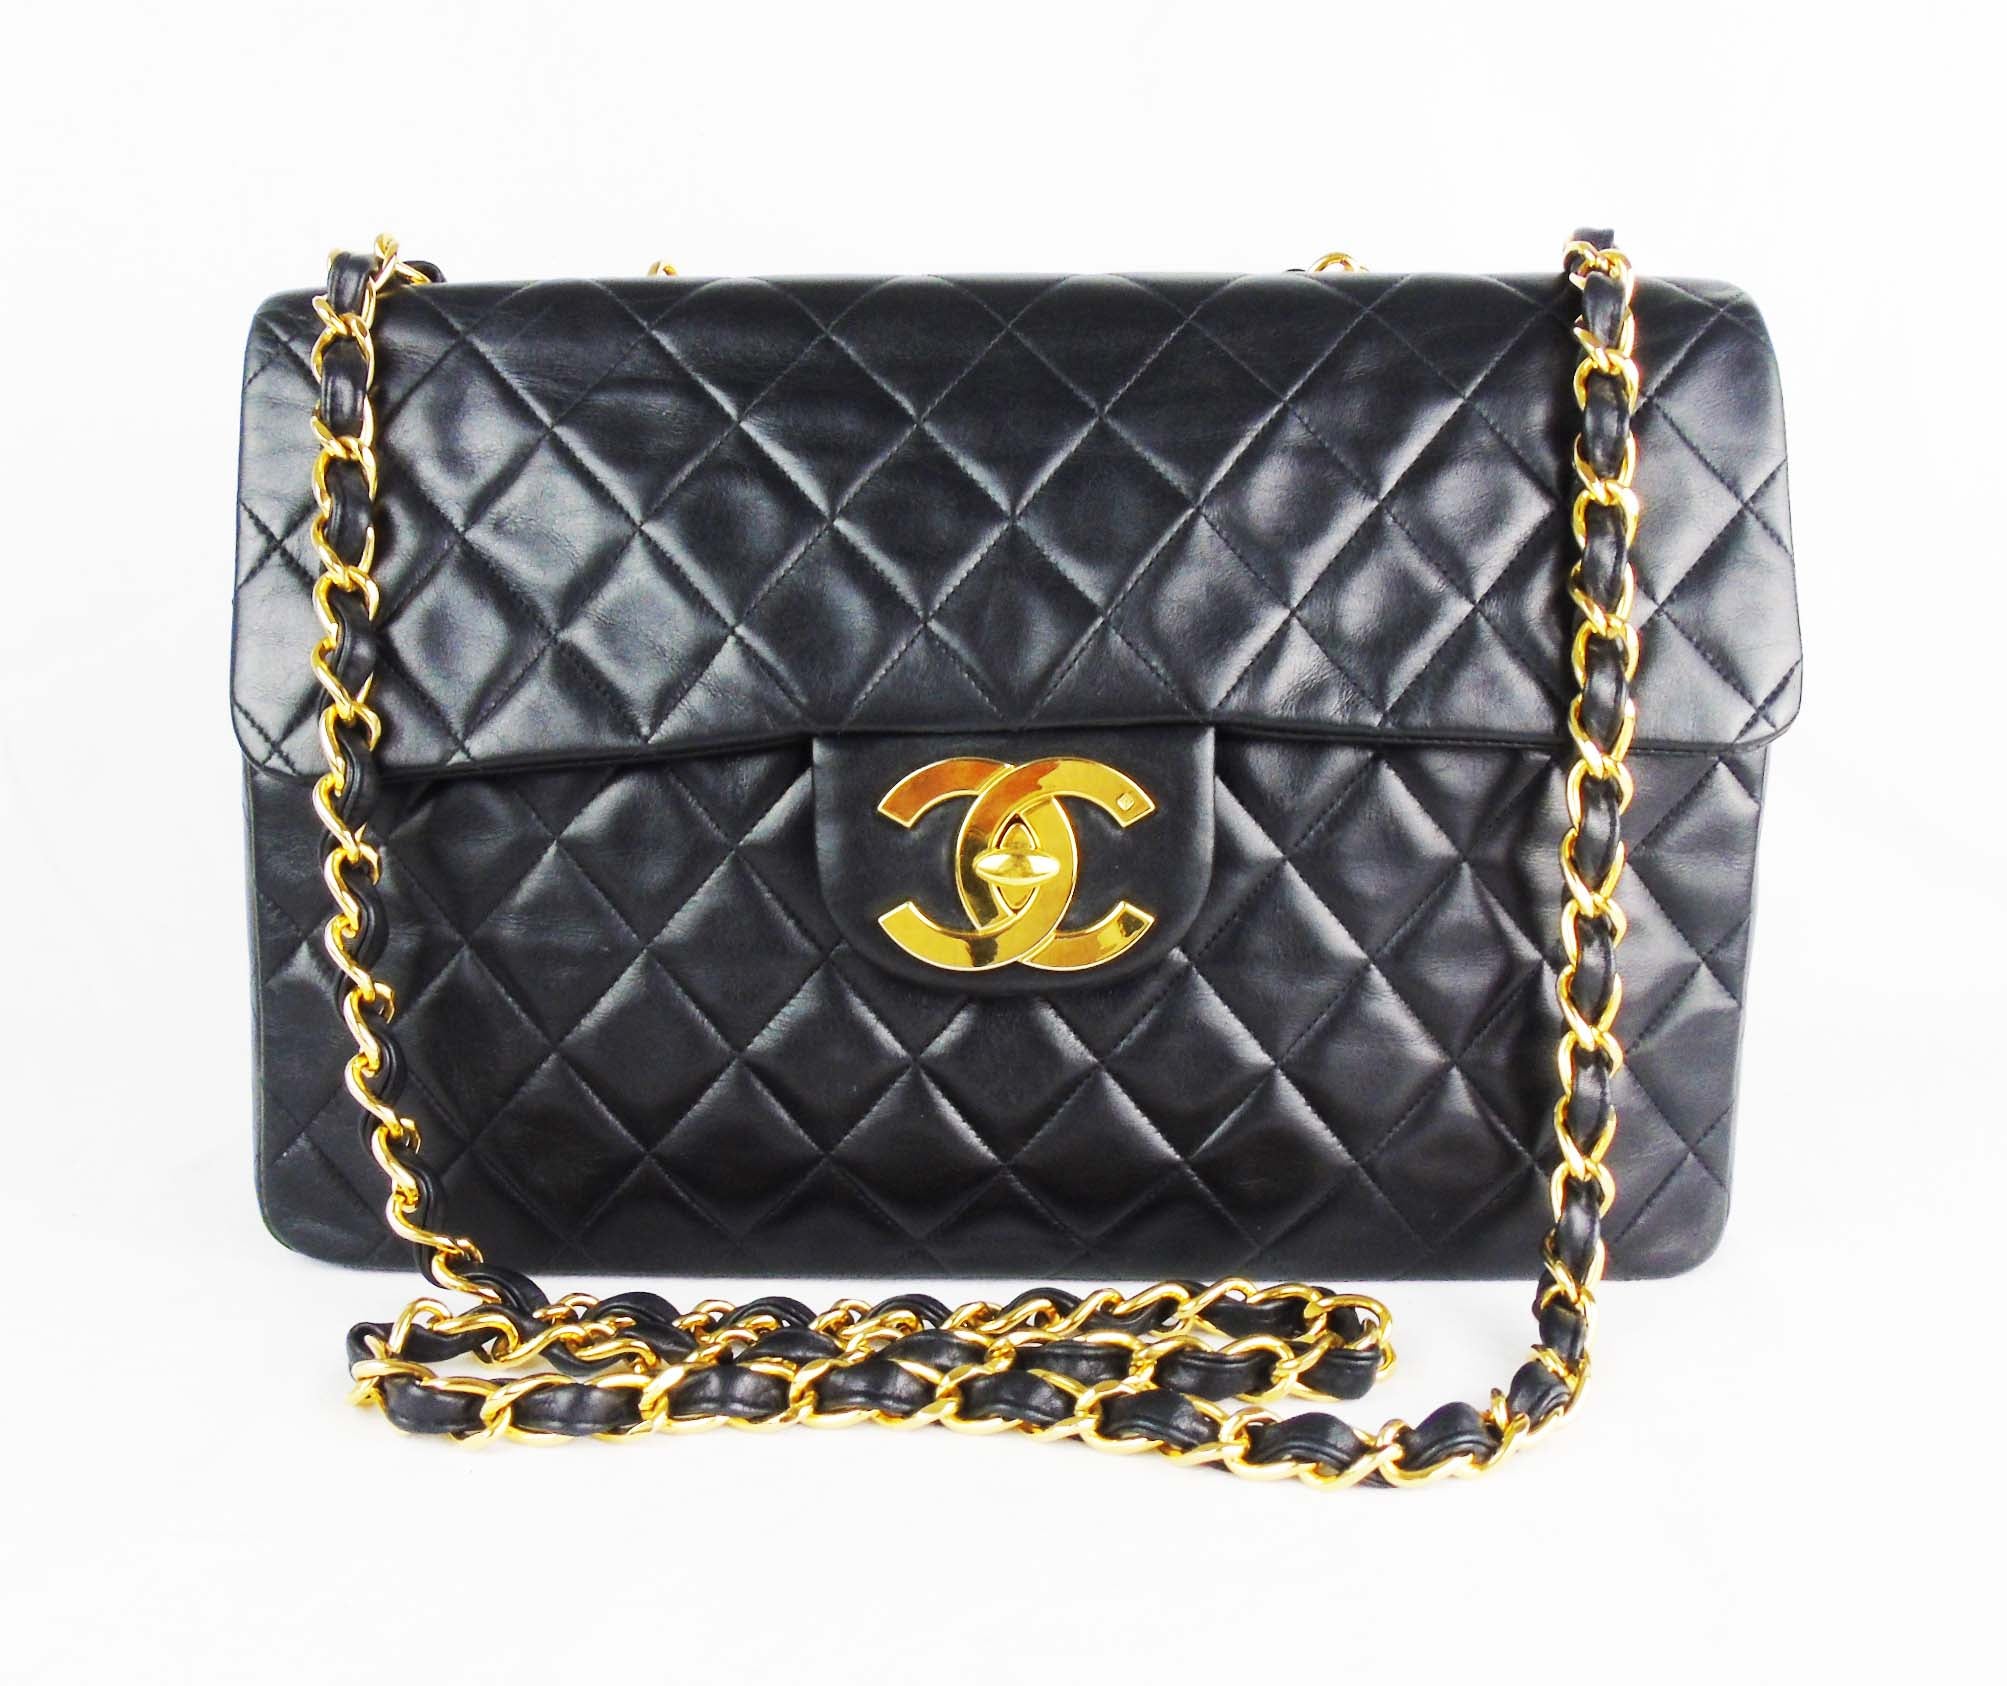 Vintage Chanel Bag  5 Things to know before you buy it  Unwrapped